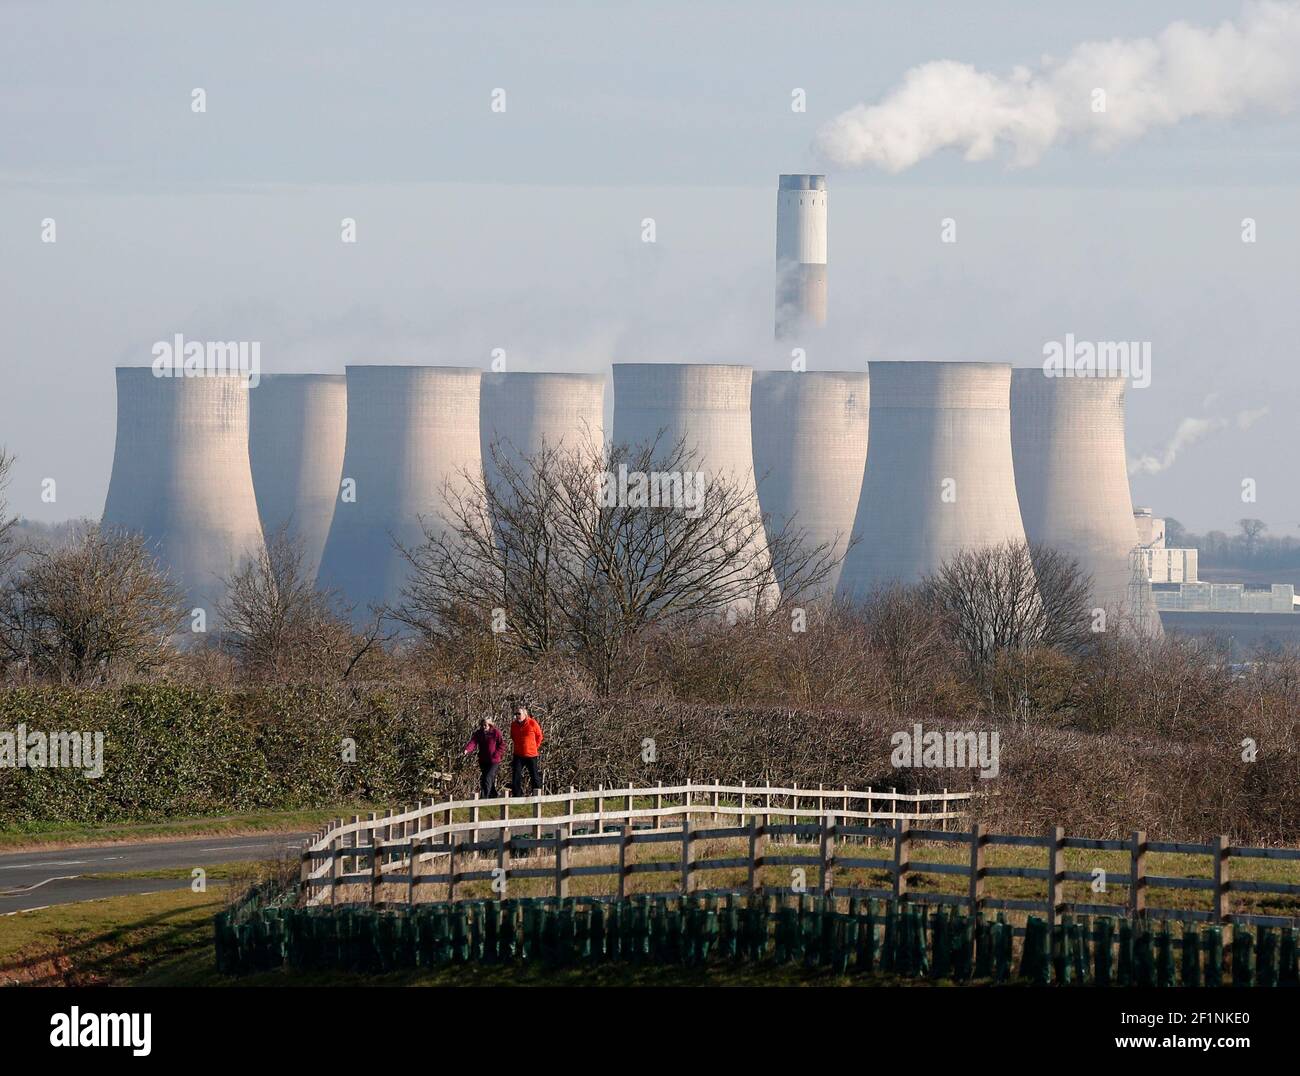 Kegworth, Leicestershire, UK. 9th March 2021. Ratcliffe-on-Soar Power Station is viewed from Kegworth as Rushcliffe Borough Council is to discuss an expression of interest for UniperÕs coal-powered Power Station site to accommodate a nuclear fusion reactor when it is decommissioned in 2025. Credit Darren Staples/Alamy Live News. Stock Photo